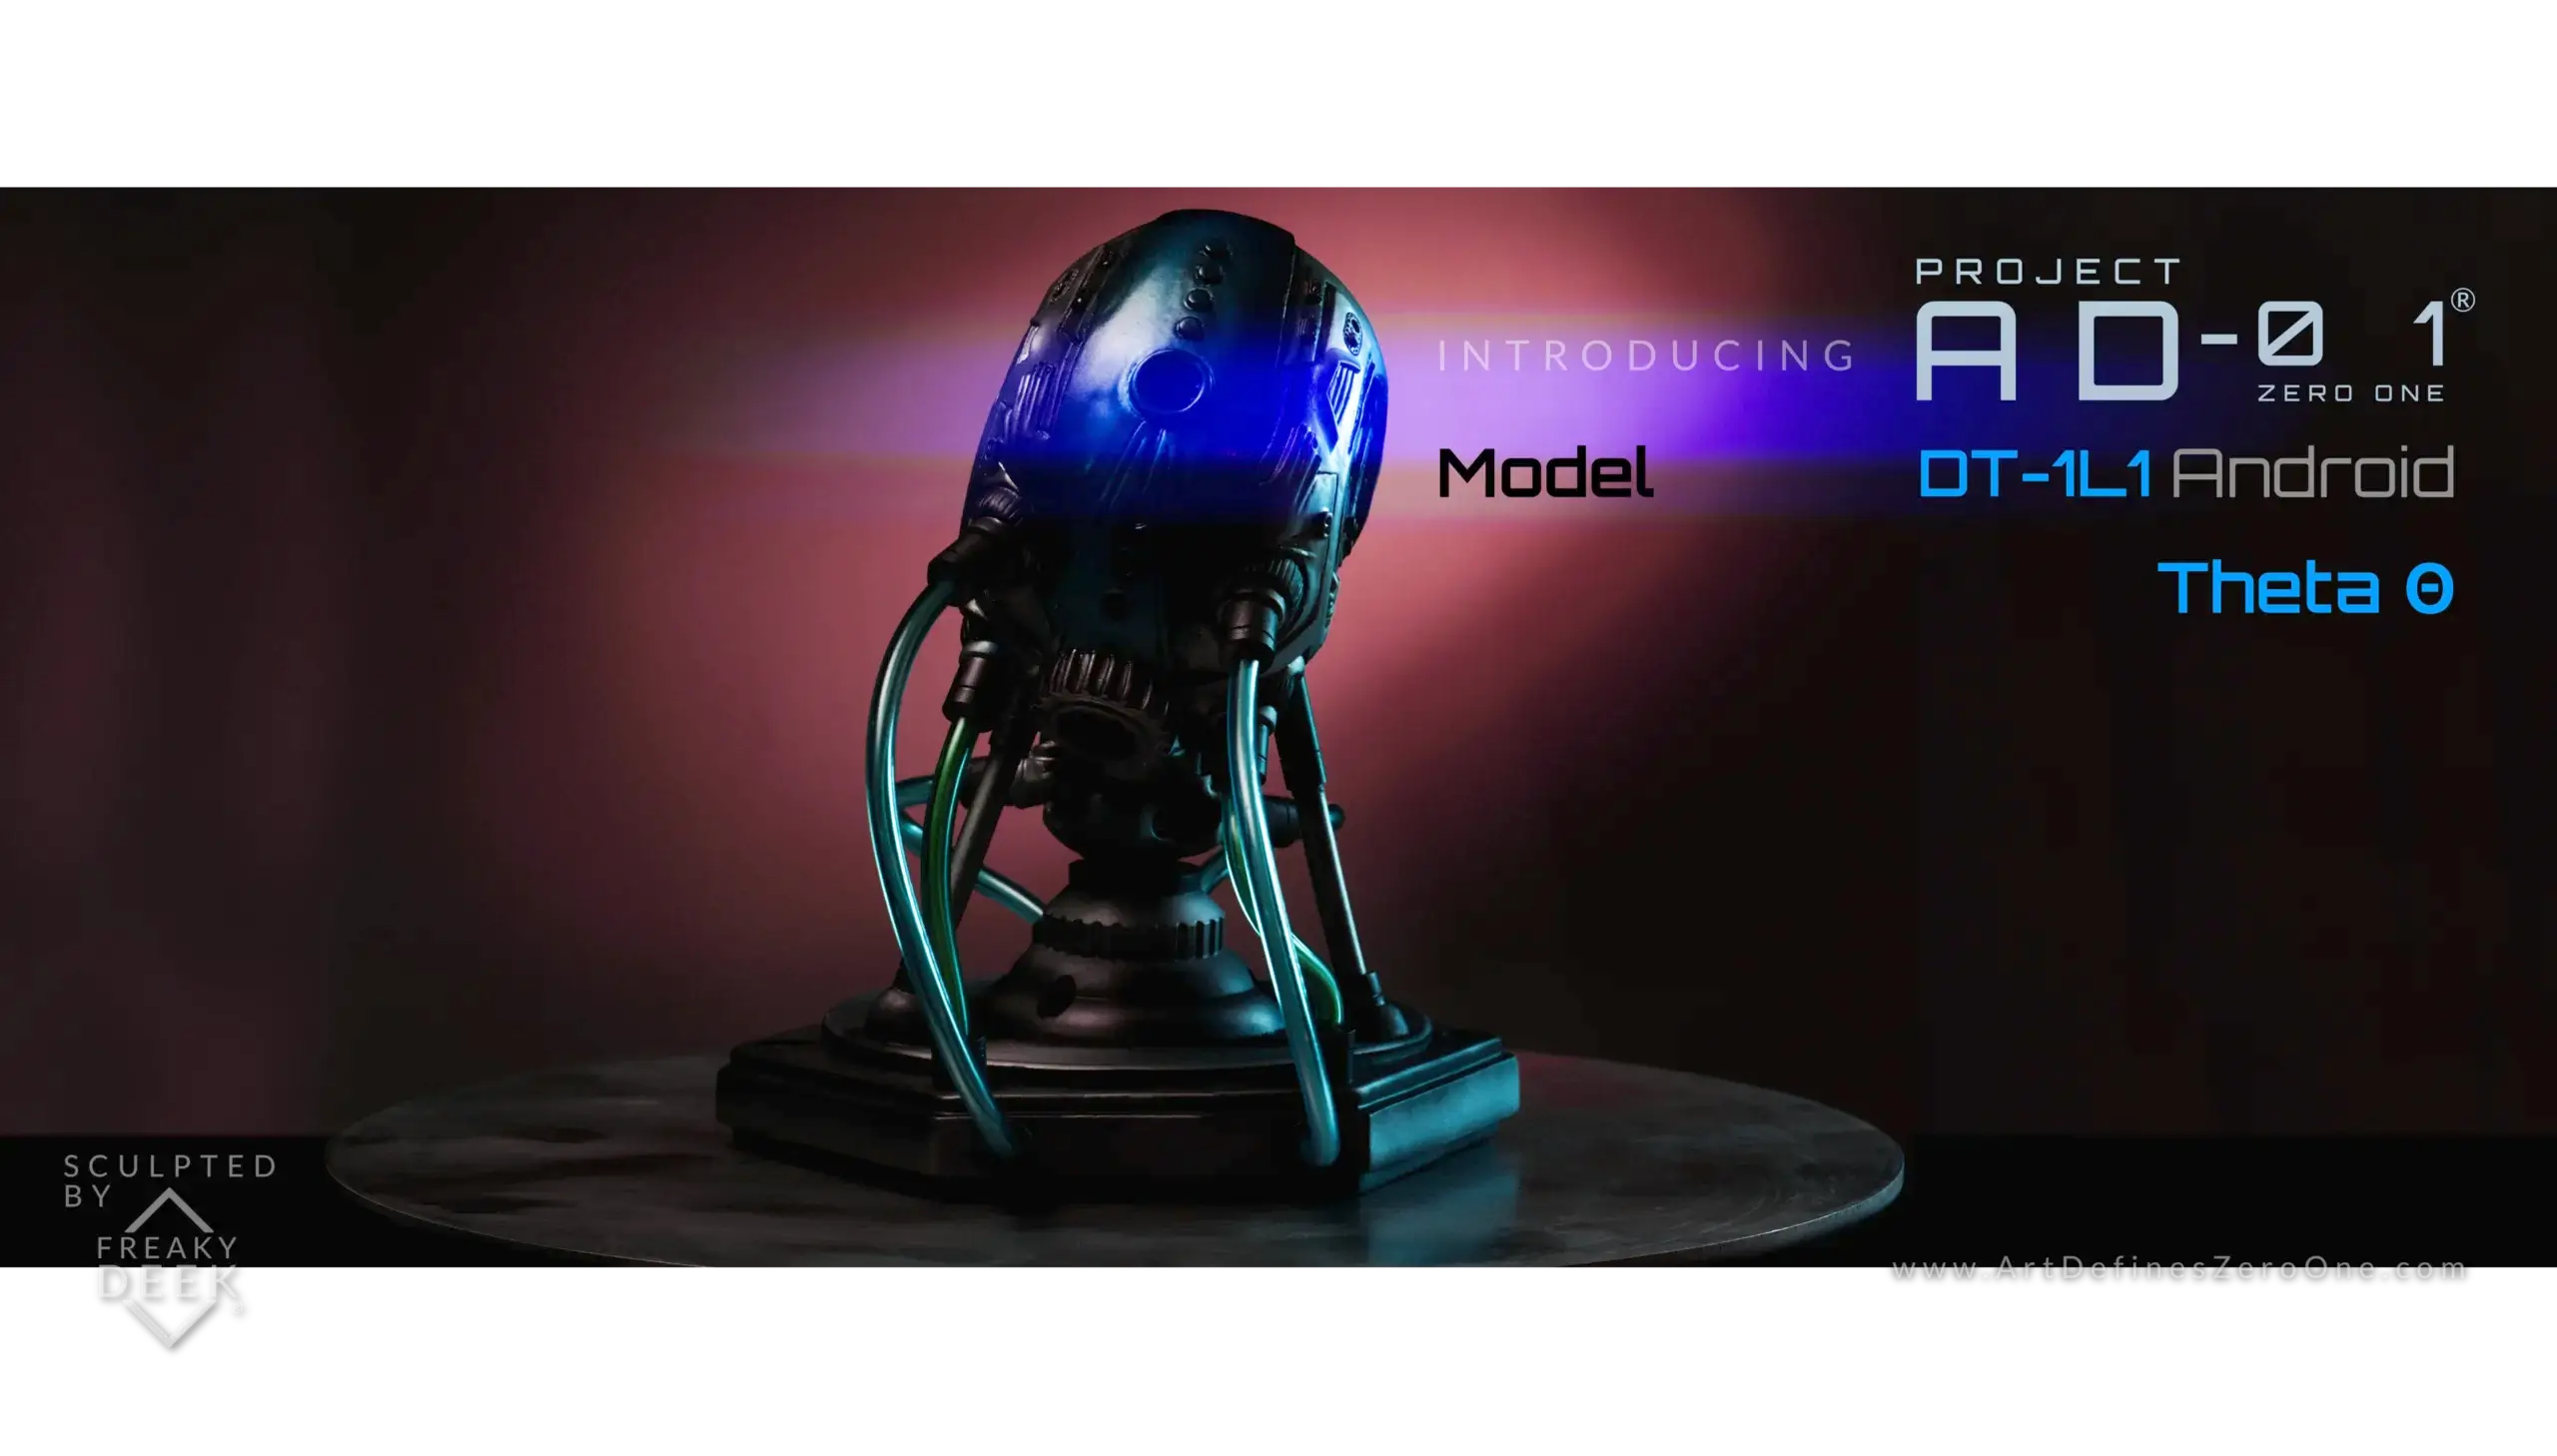 Project AD-01 handmade android blue sculpture Theta back view